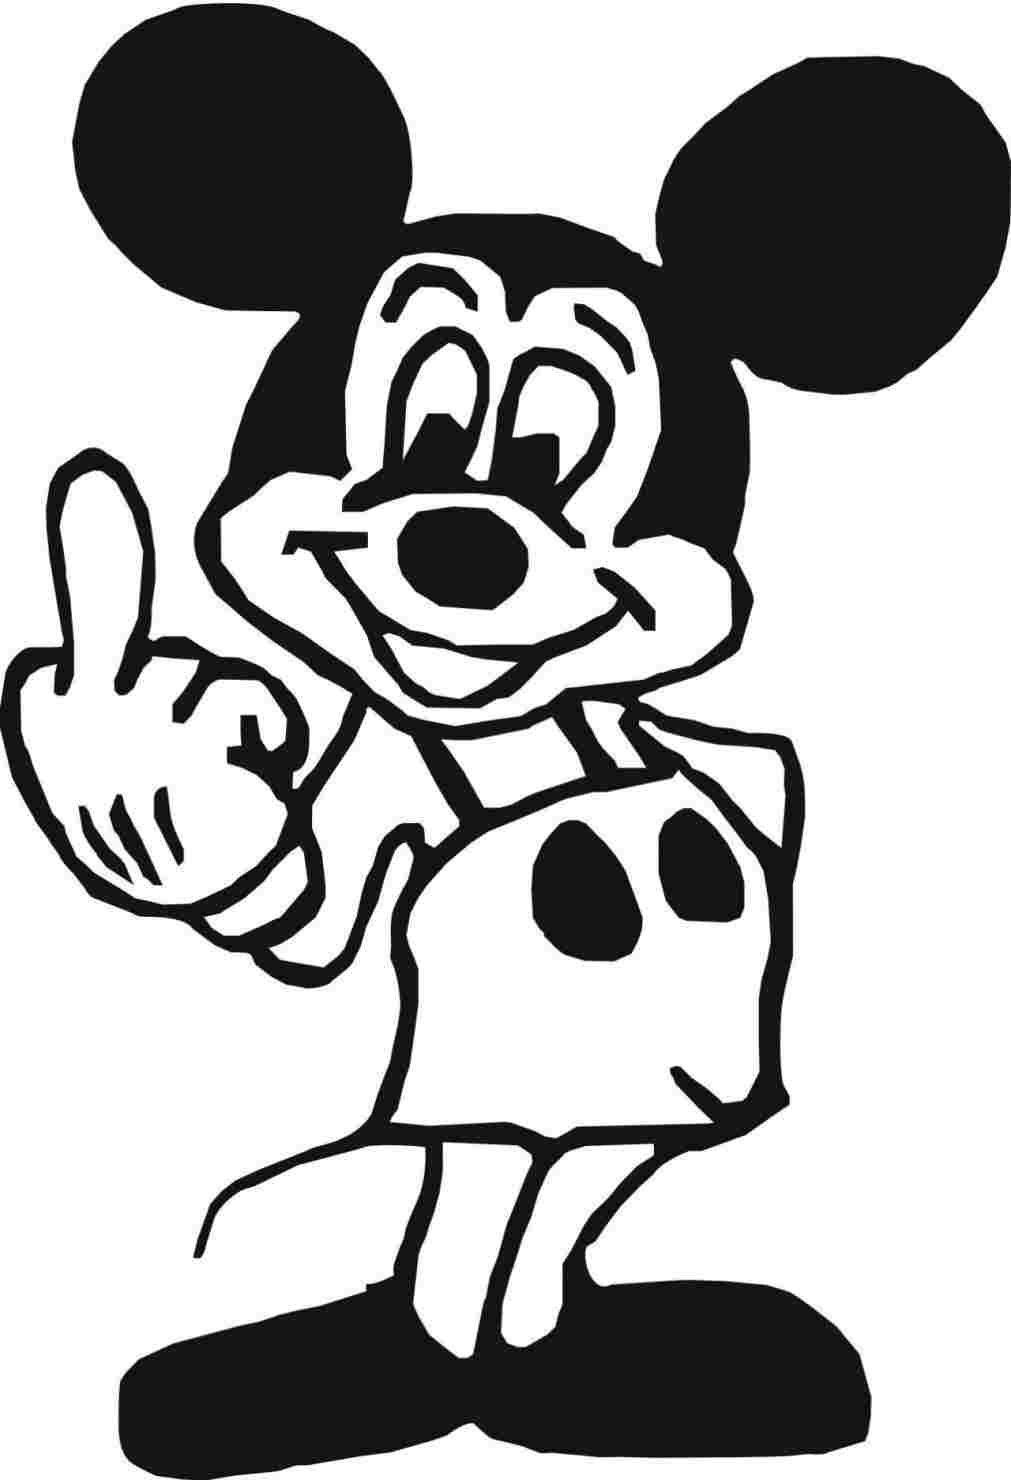 Mickey Mouse Cute Easy Disney Characters To Draw - pic-connect